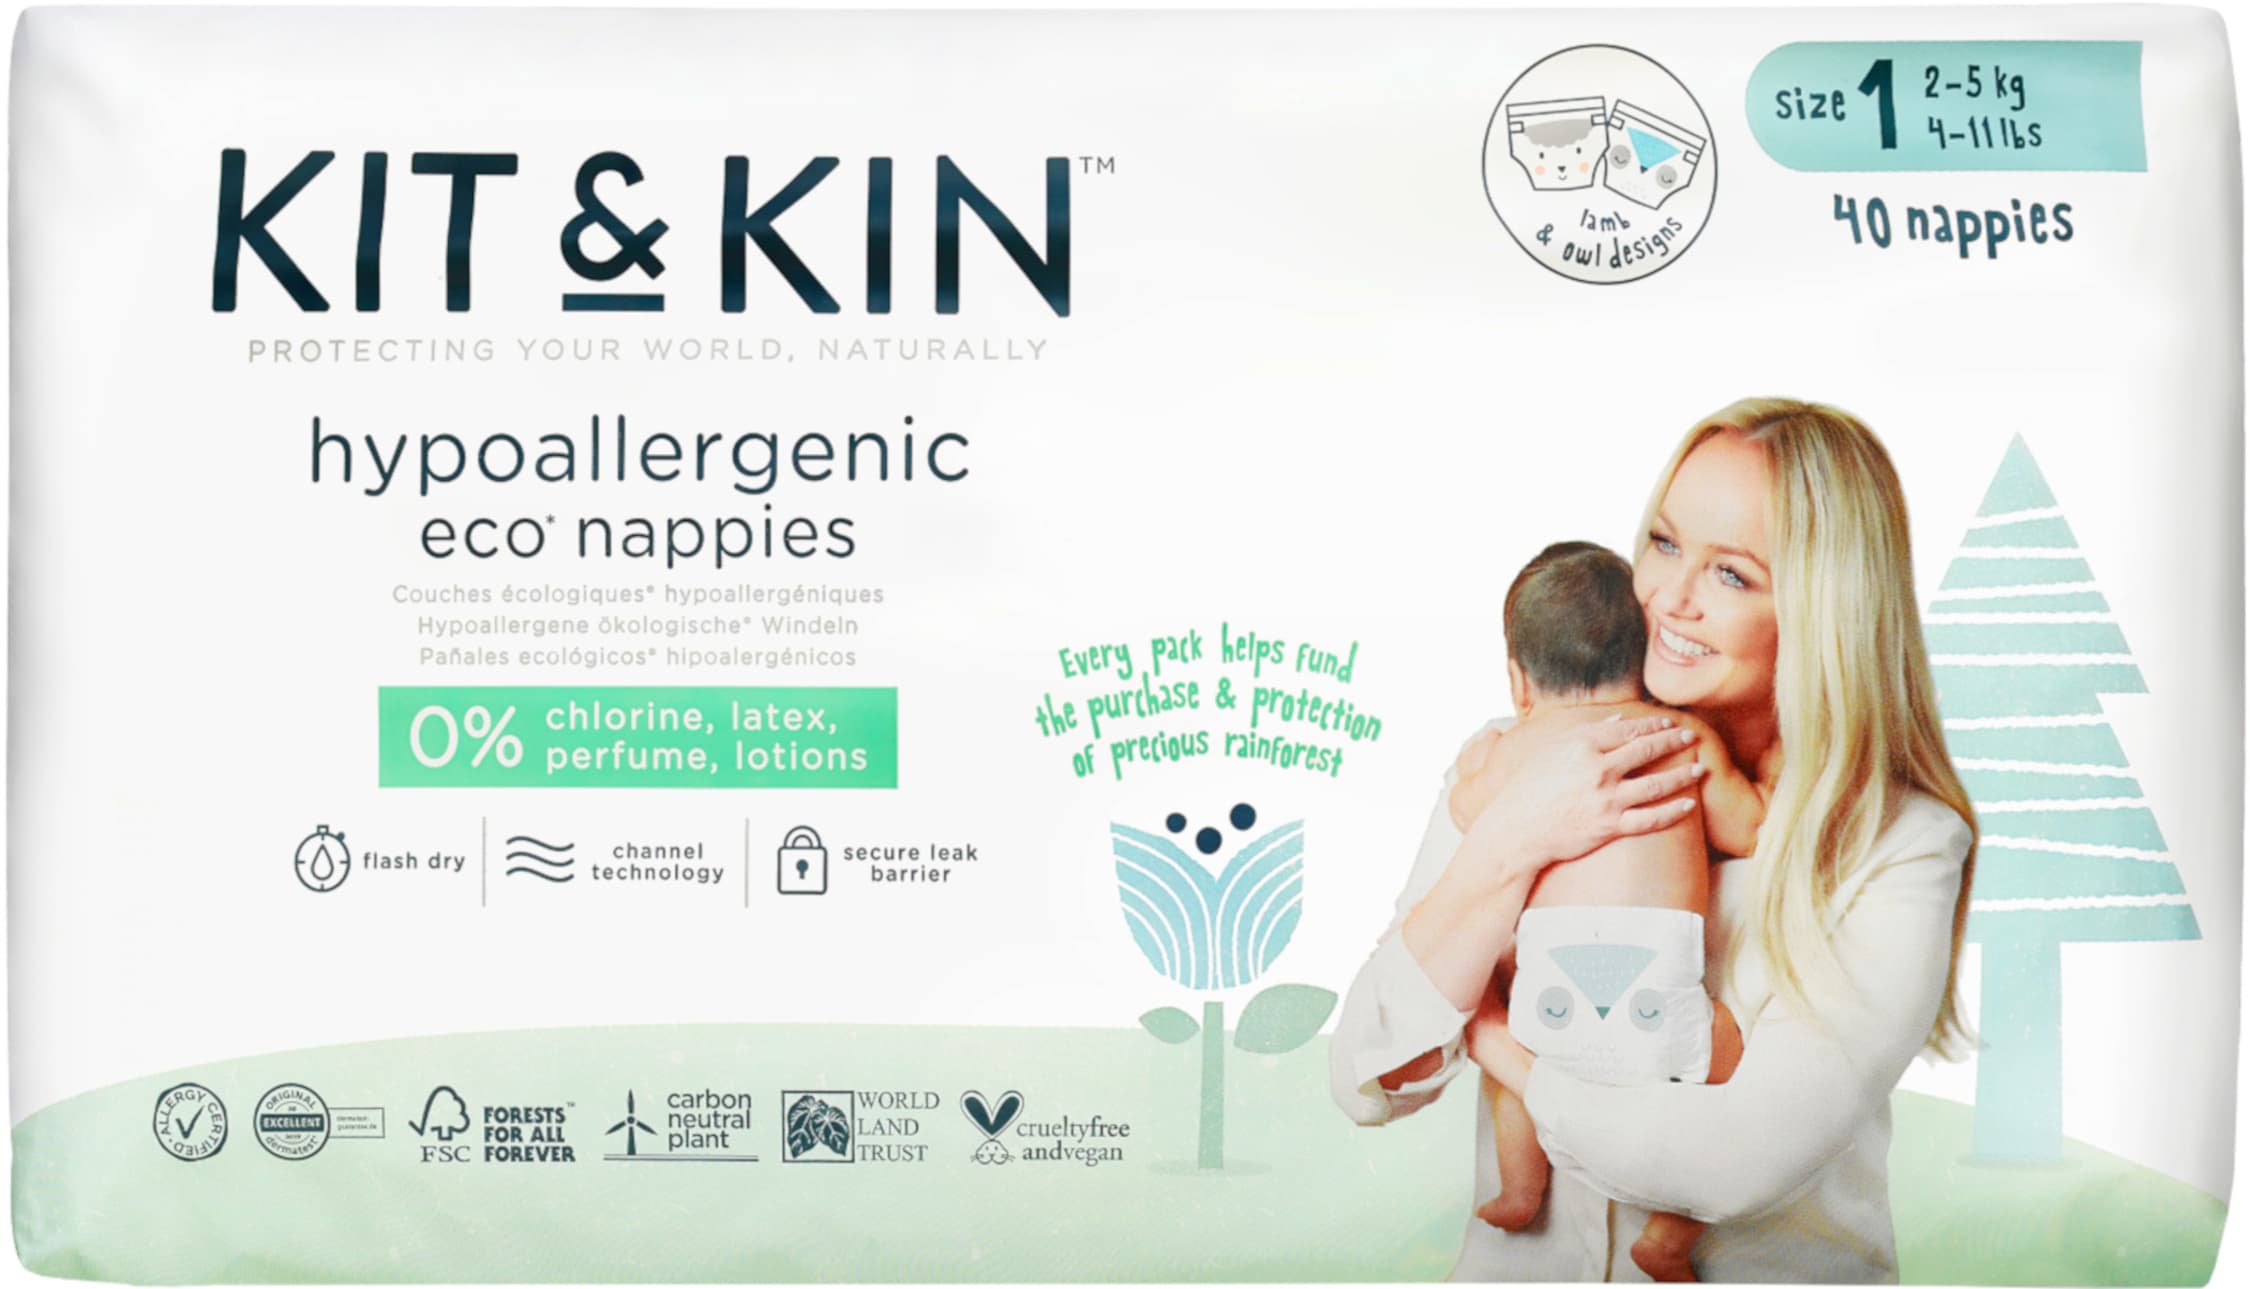 Kit & Kin Hypoallergenic Eco Nappies Size 1 2-5kg RRP £8 CLEARANCE XL £6.99